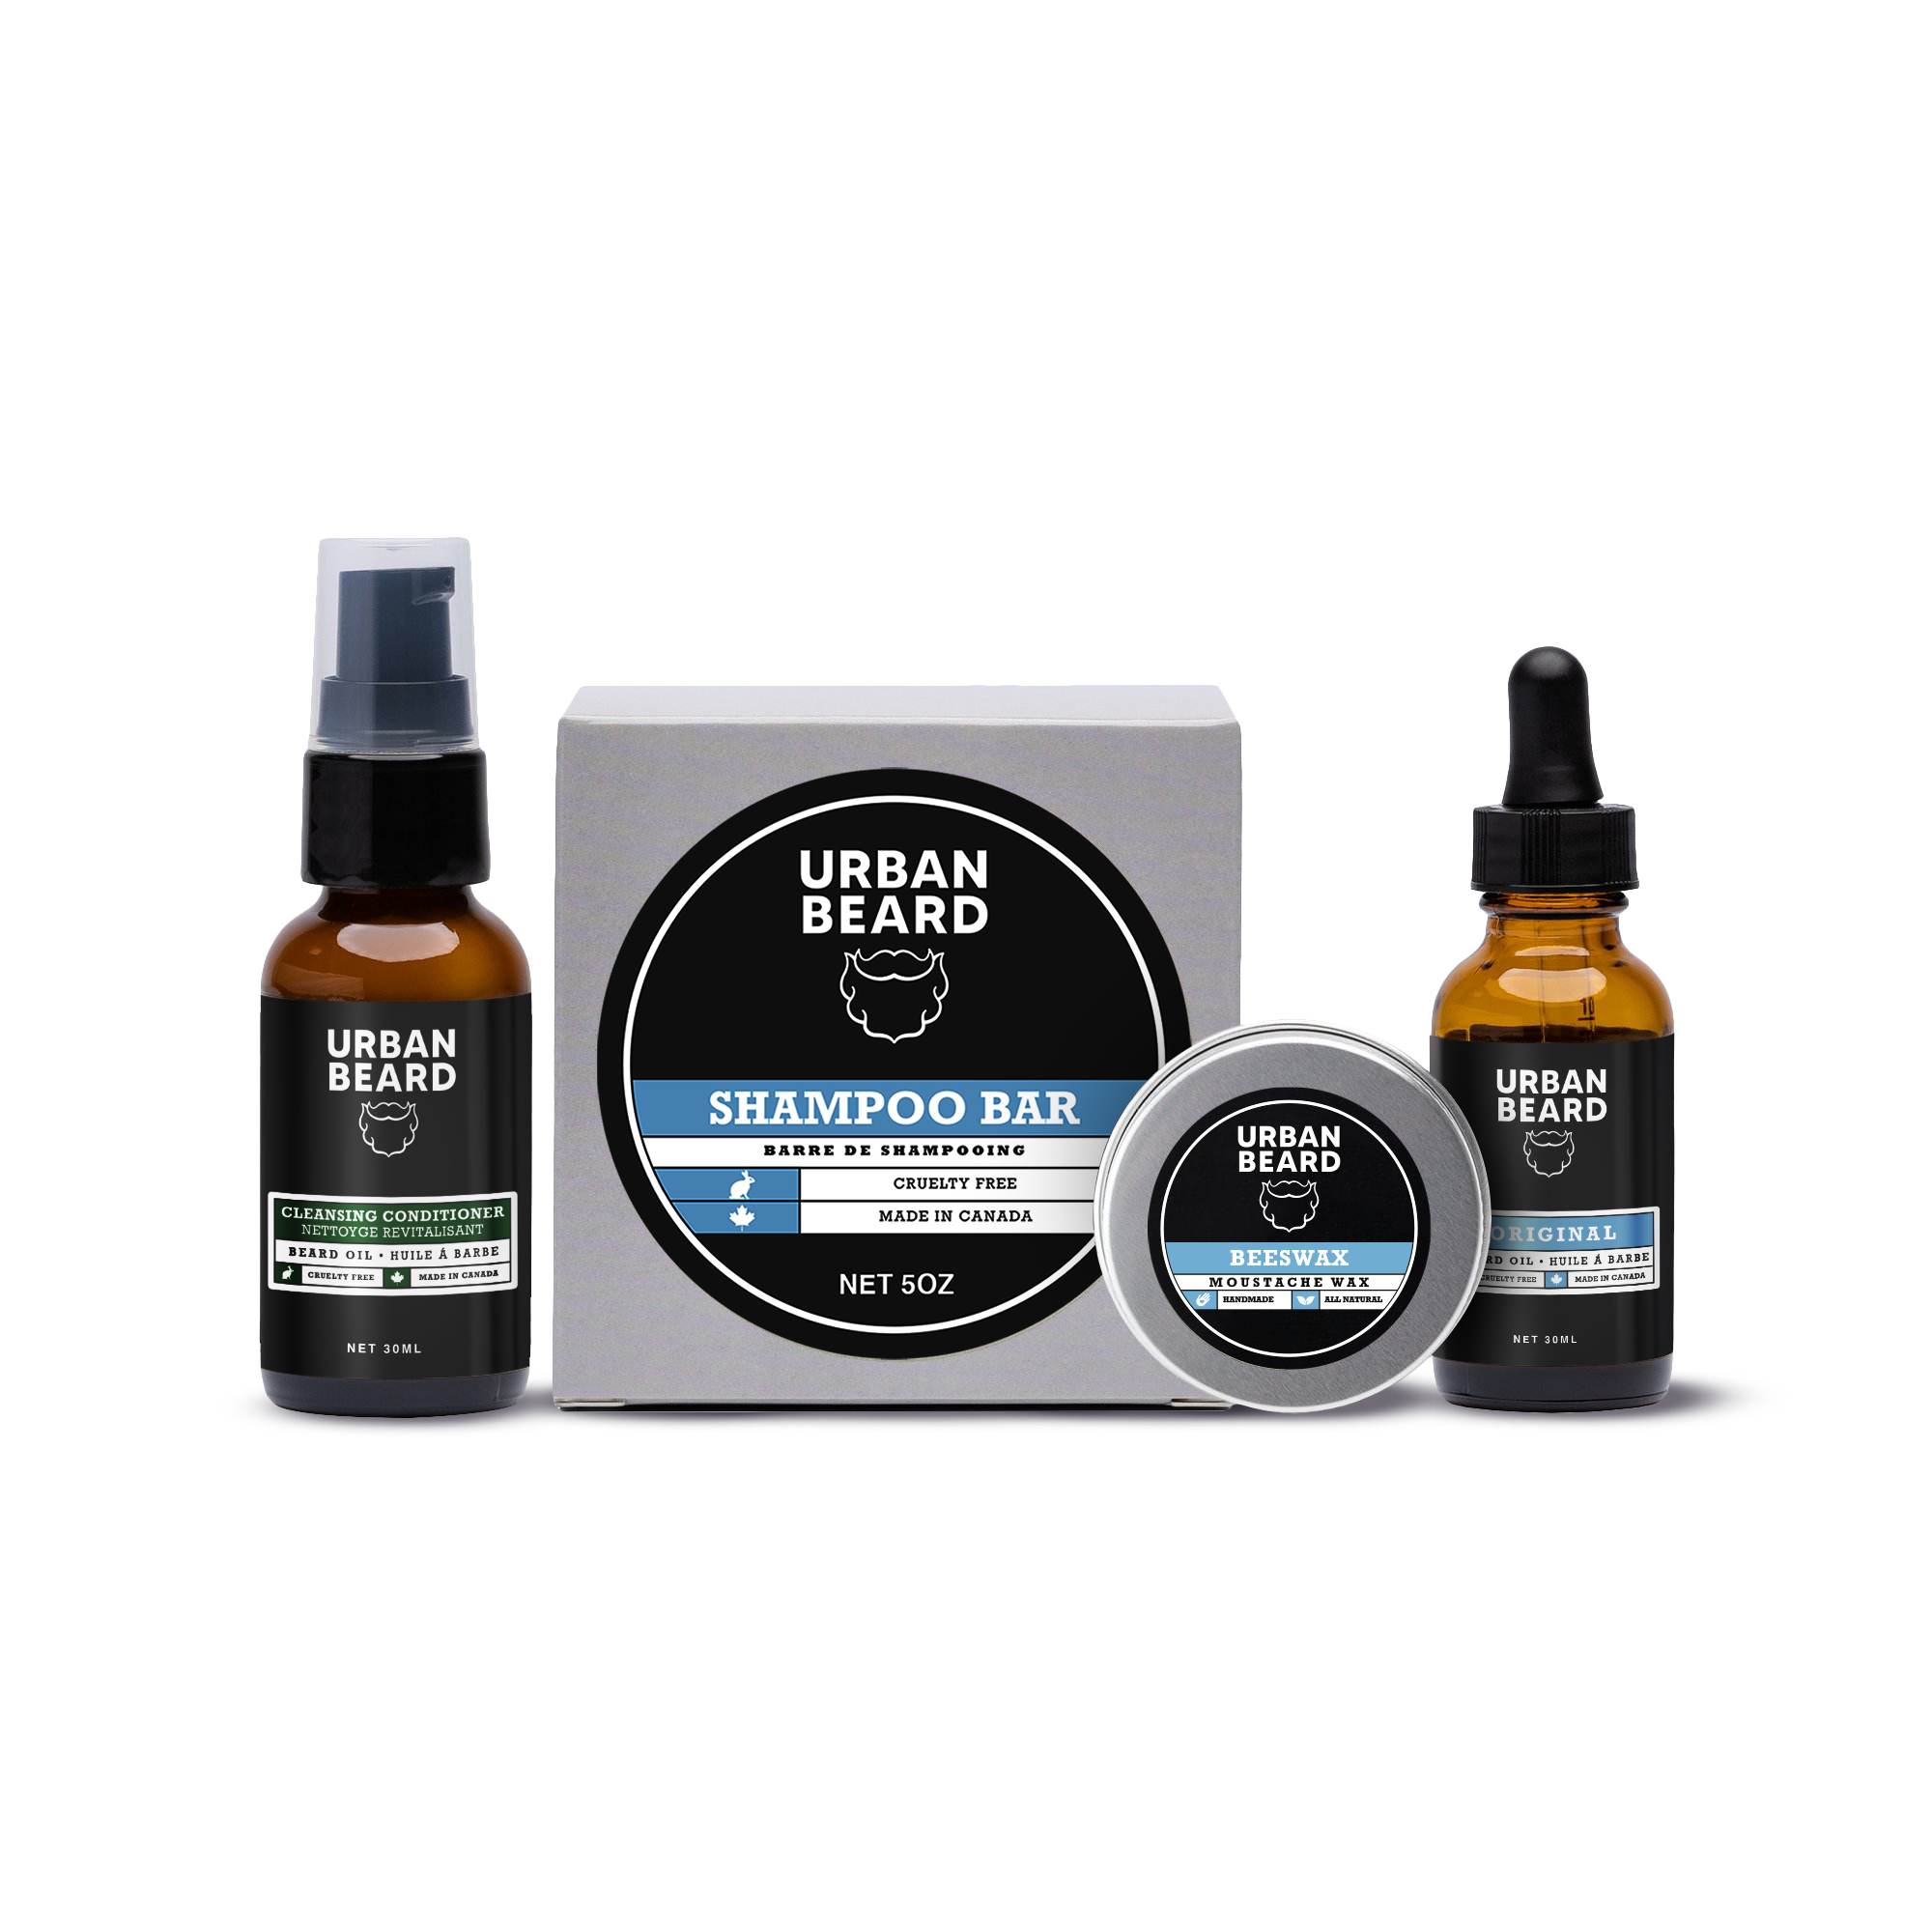 Beard Product Bundle which includes beard oil, cleansing conditoner, moustache wax & shampoo bar. Natural & organic ingredients used to enhance your beard and give you healthy skin. Urban Beard is a vegan friendly company.